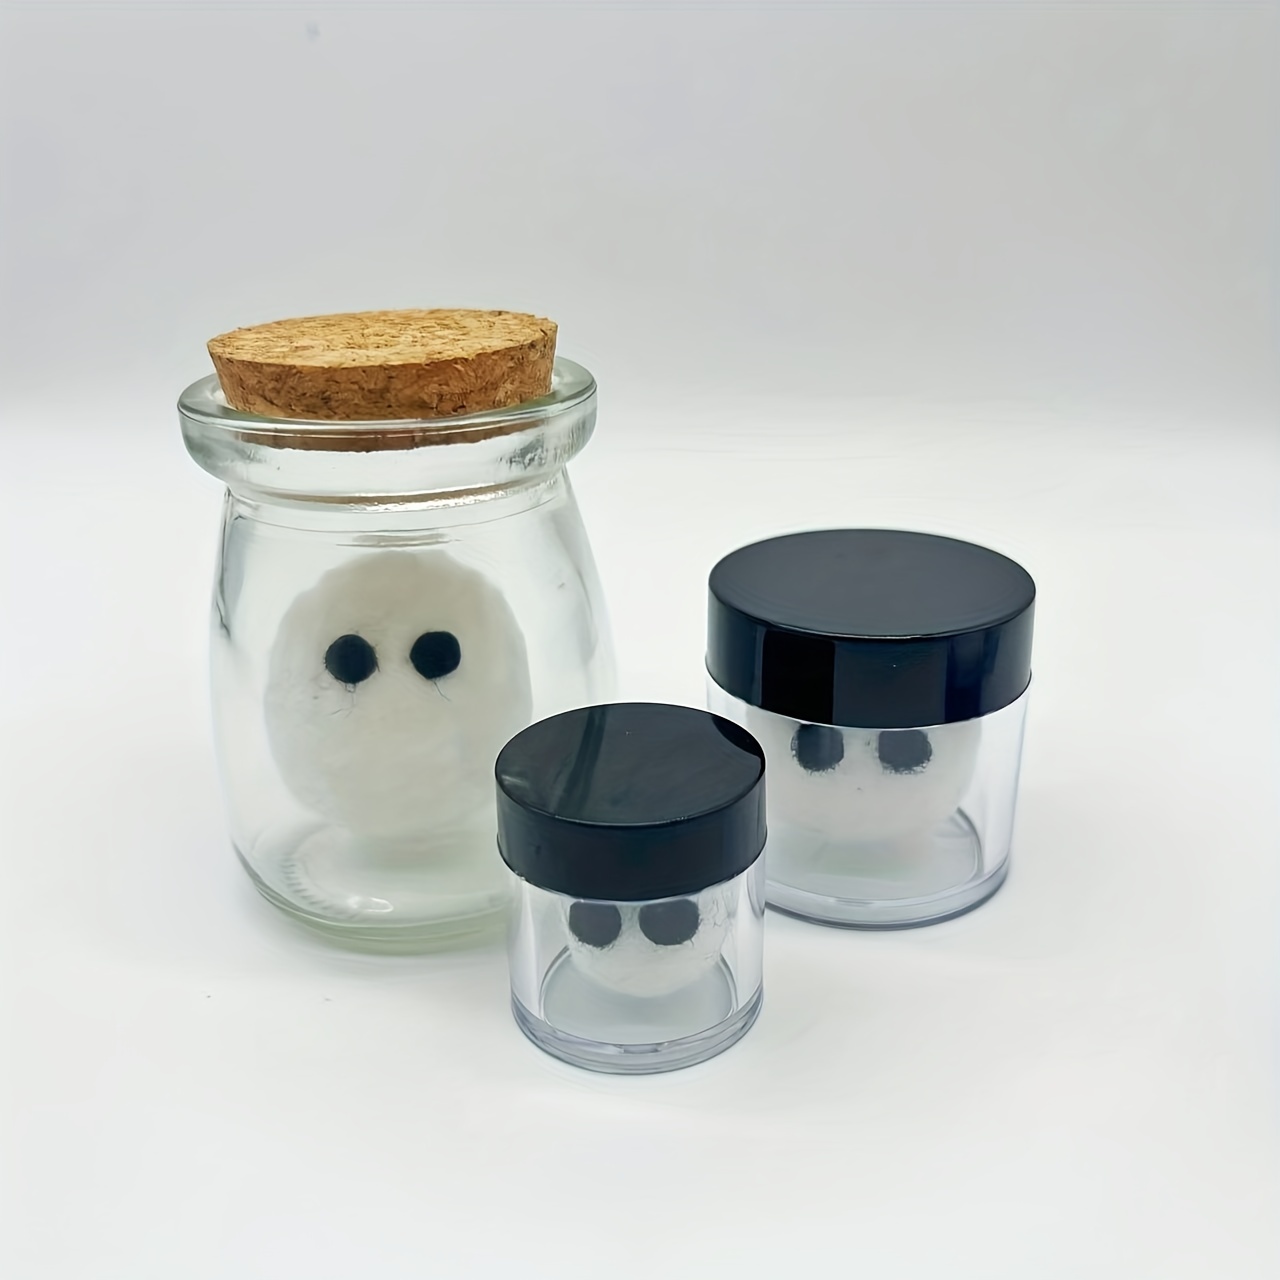 Small Cookie Jar and Basket